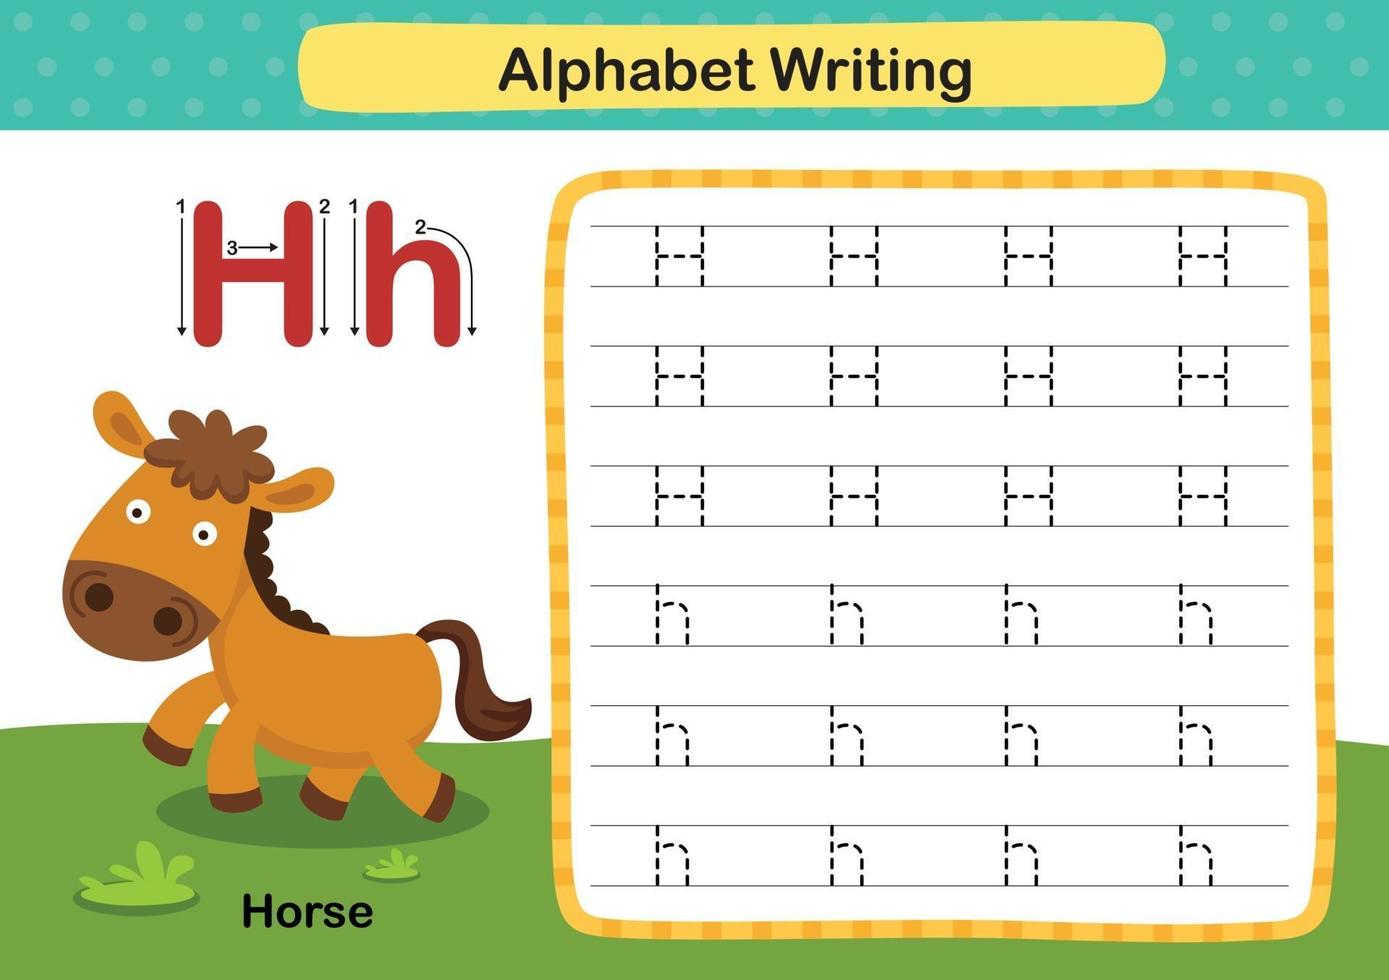 Alphabet Letter H-Horse exercise with cartoon vocabulary illustration, vector